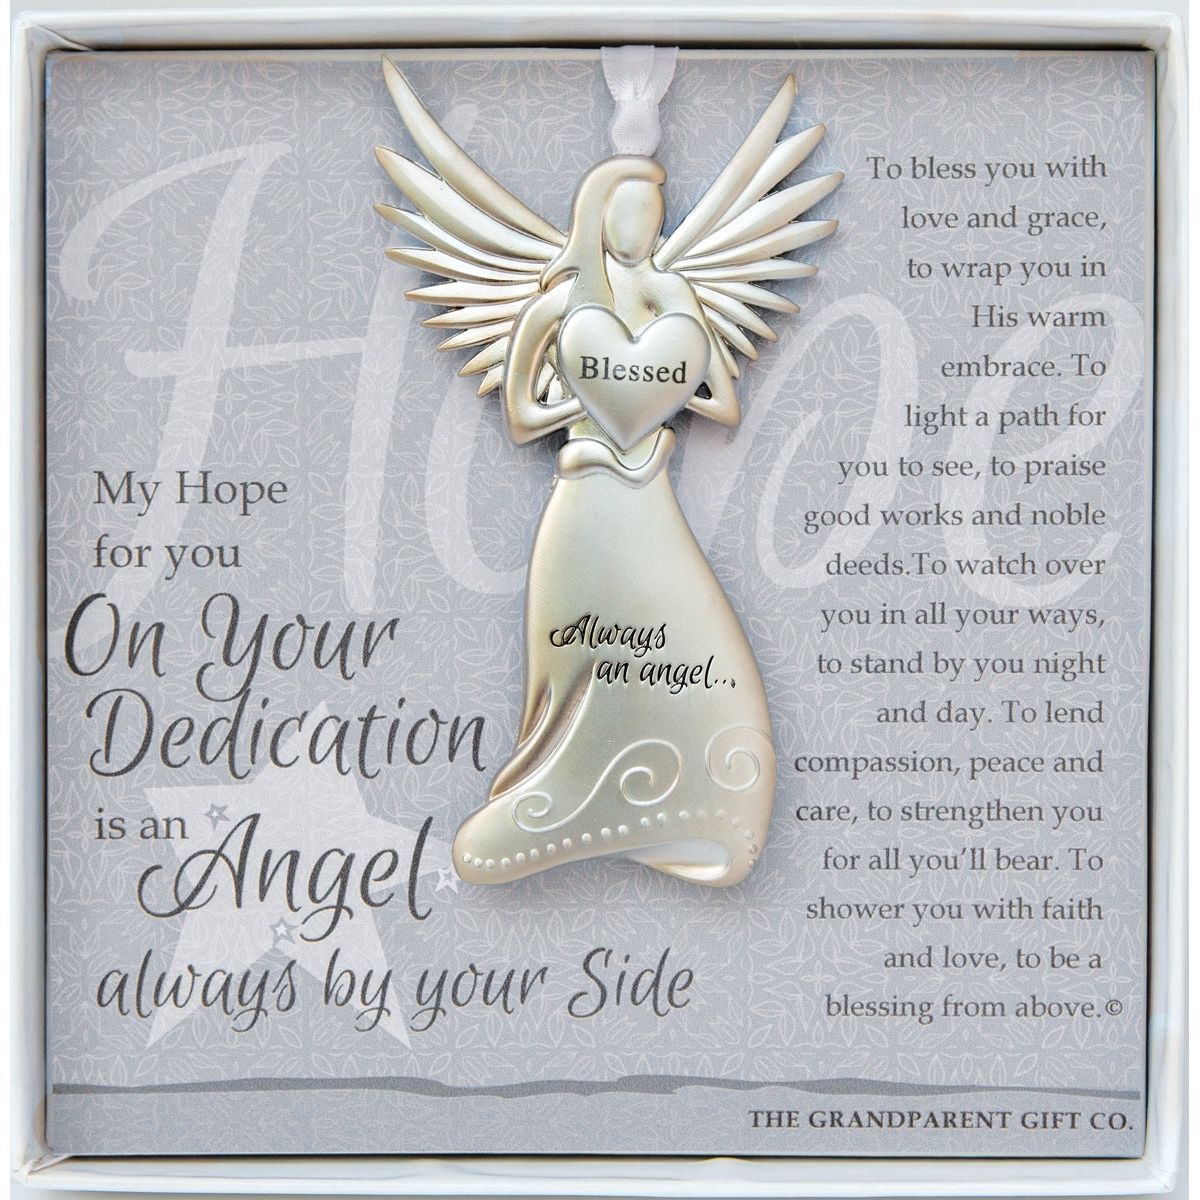 Dedication Gift - 4" metal blessed angel ornament with "On Your Dedication" poem in white box with clear lid.